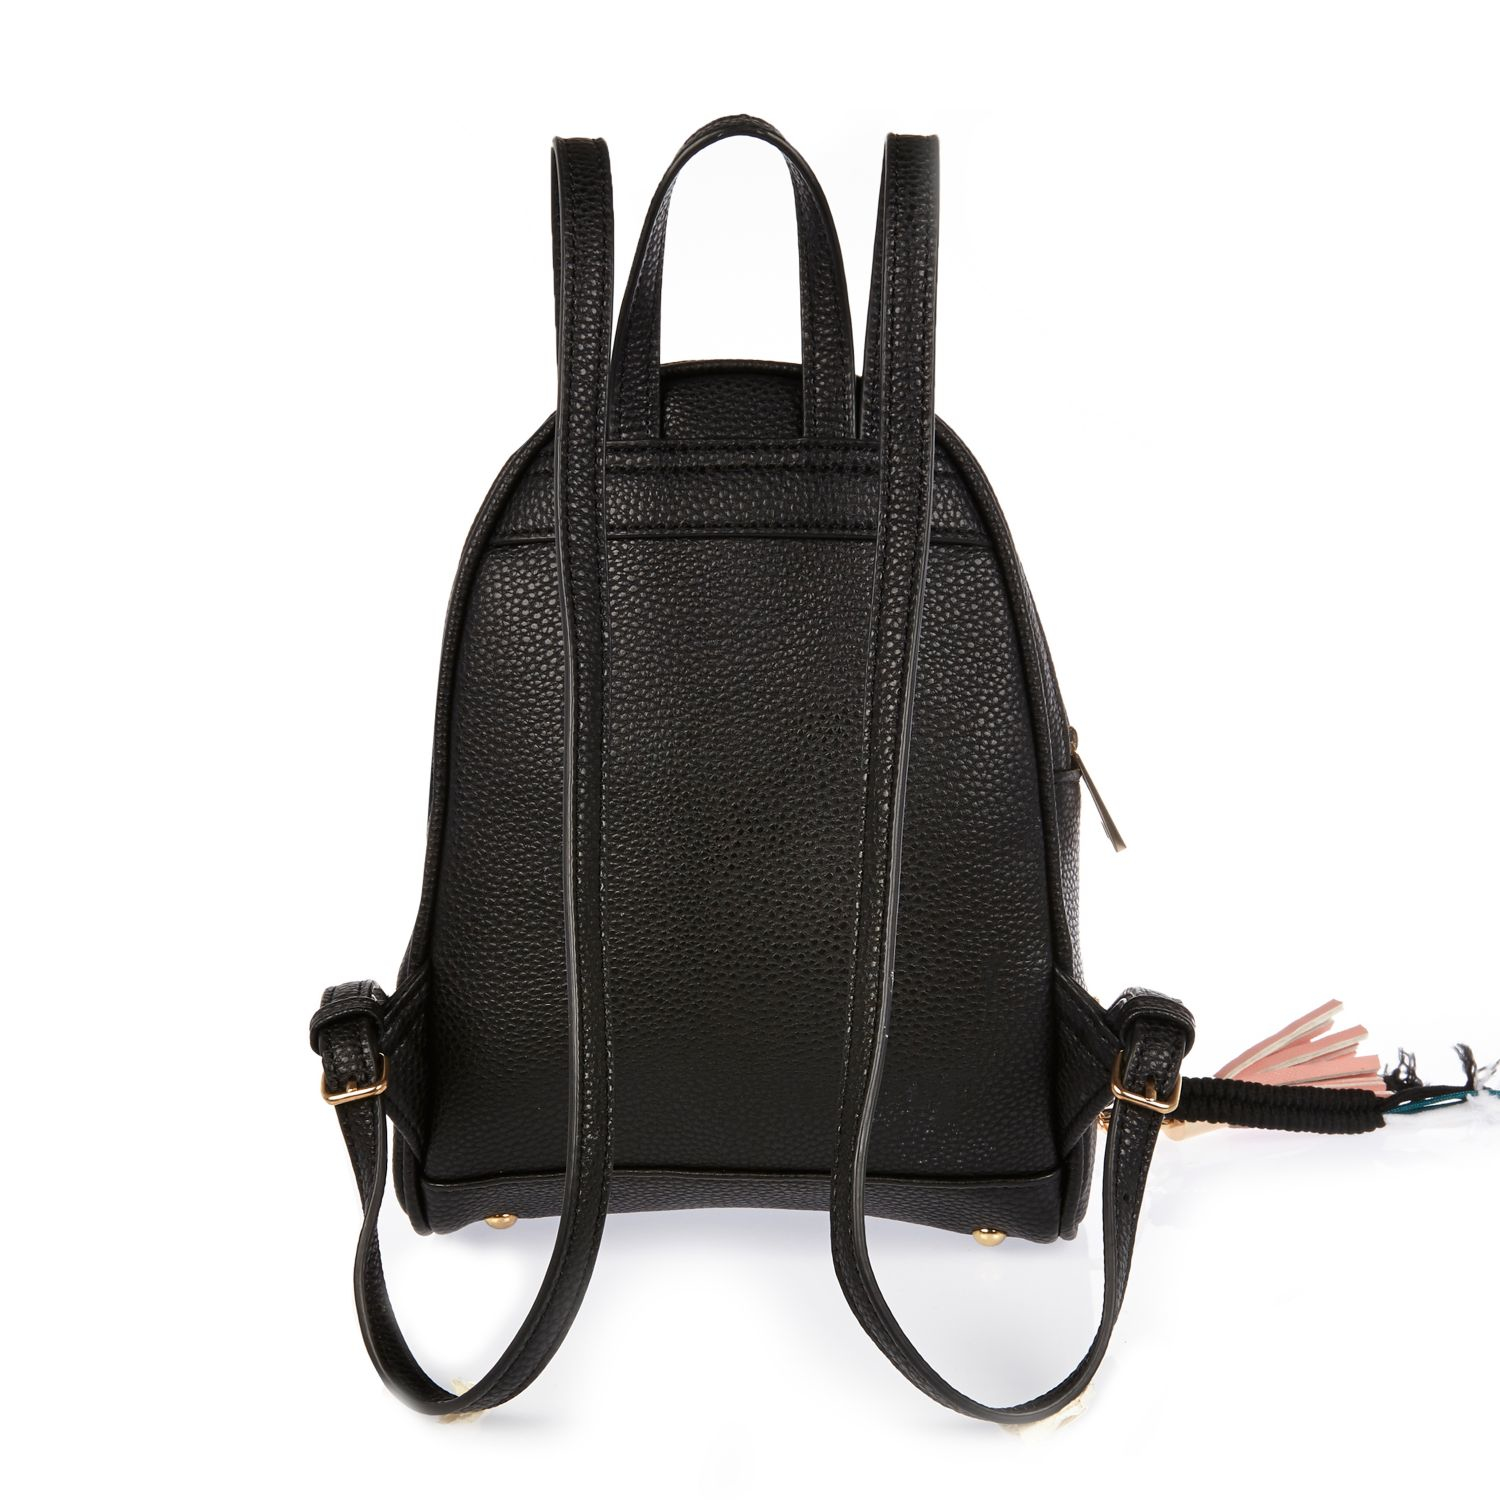 River island Laser-Cut Faux-Leather Backpack in Black | Lyst